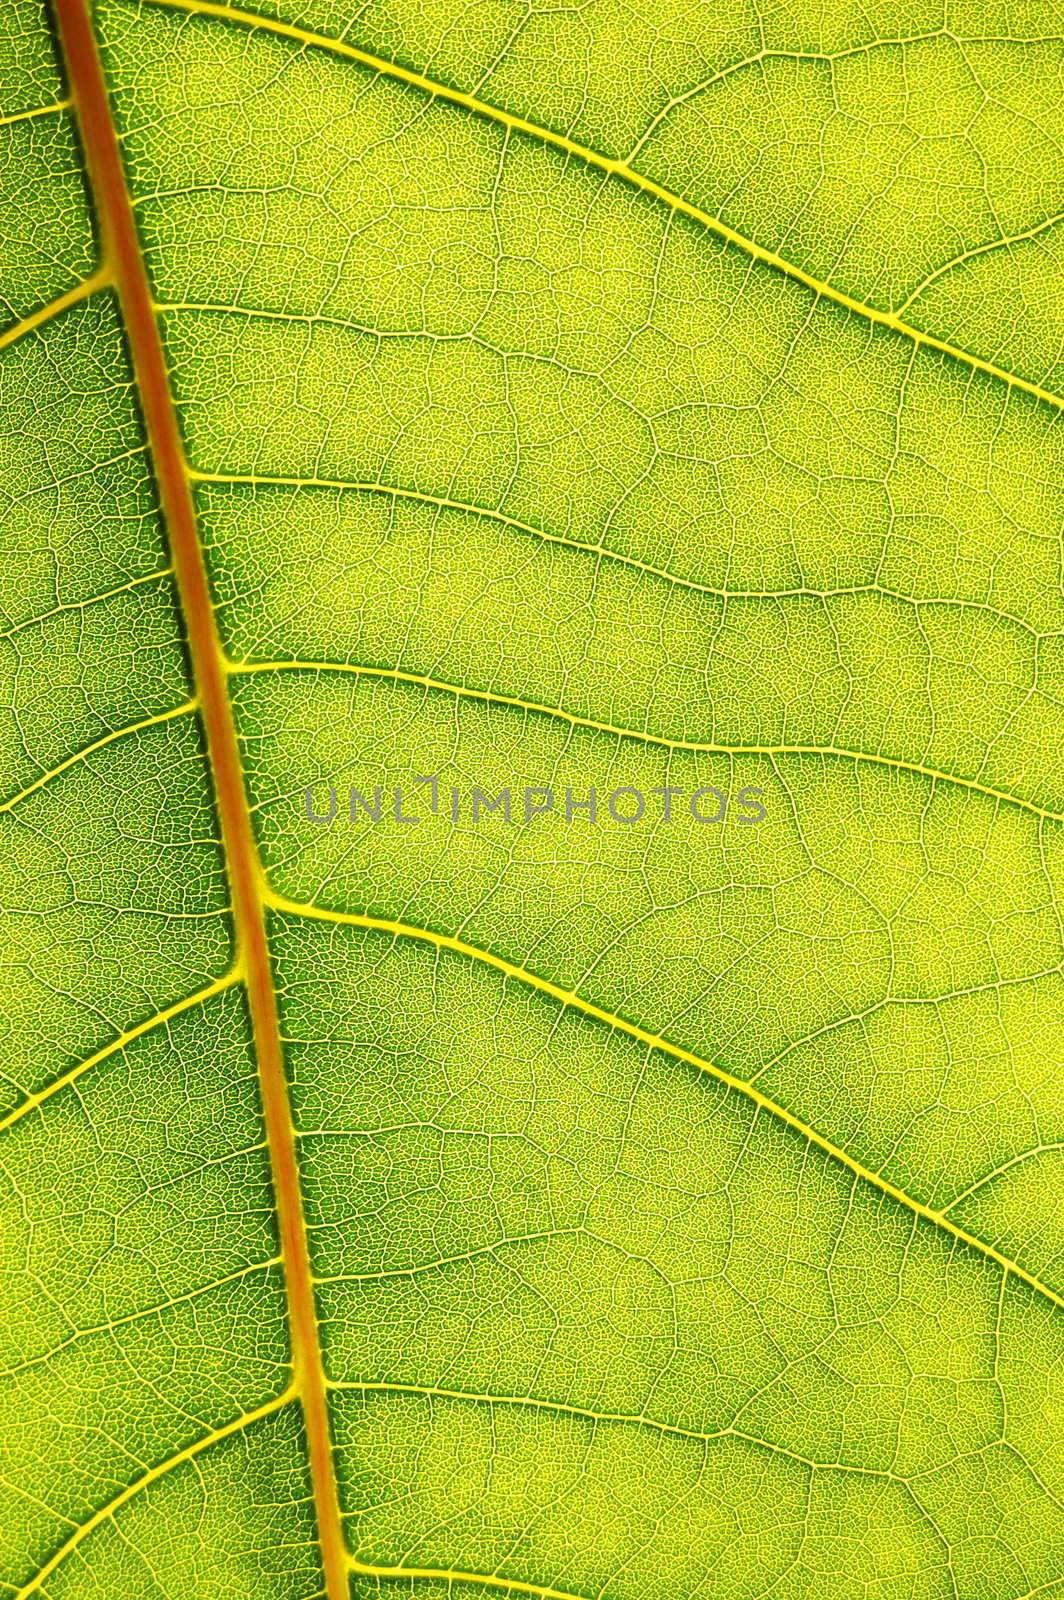 structure texture and pattern of green leaf